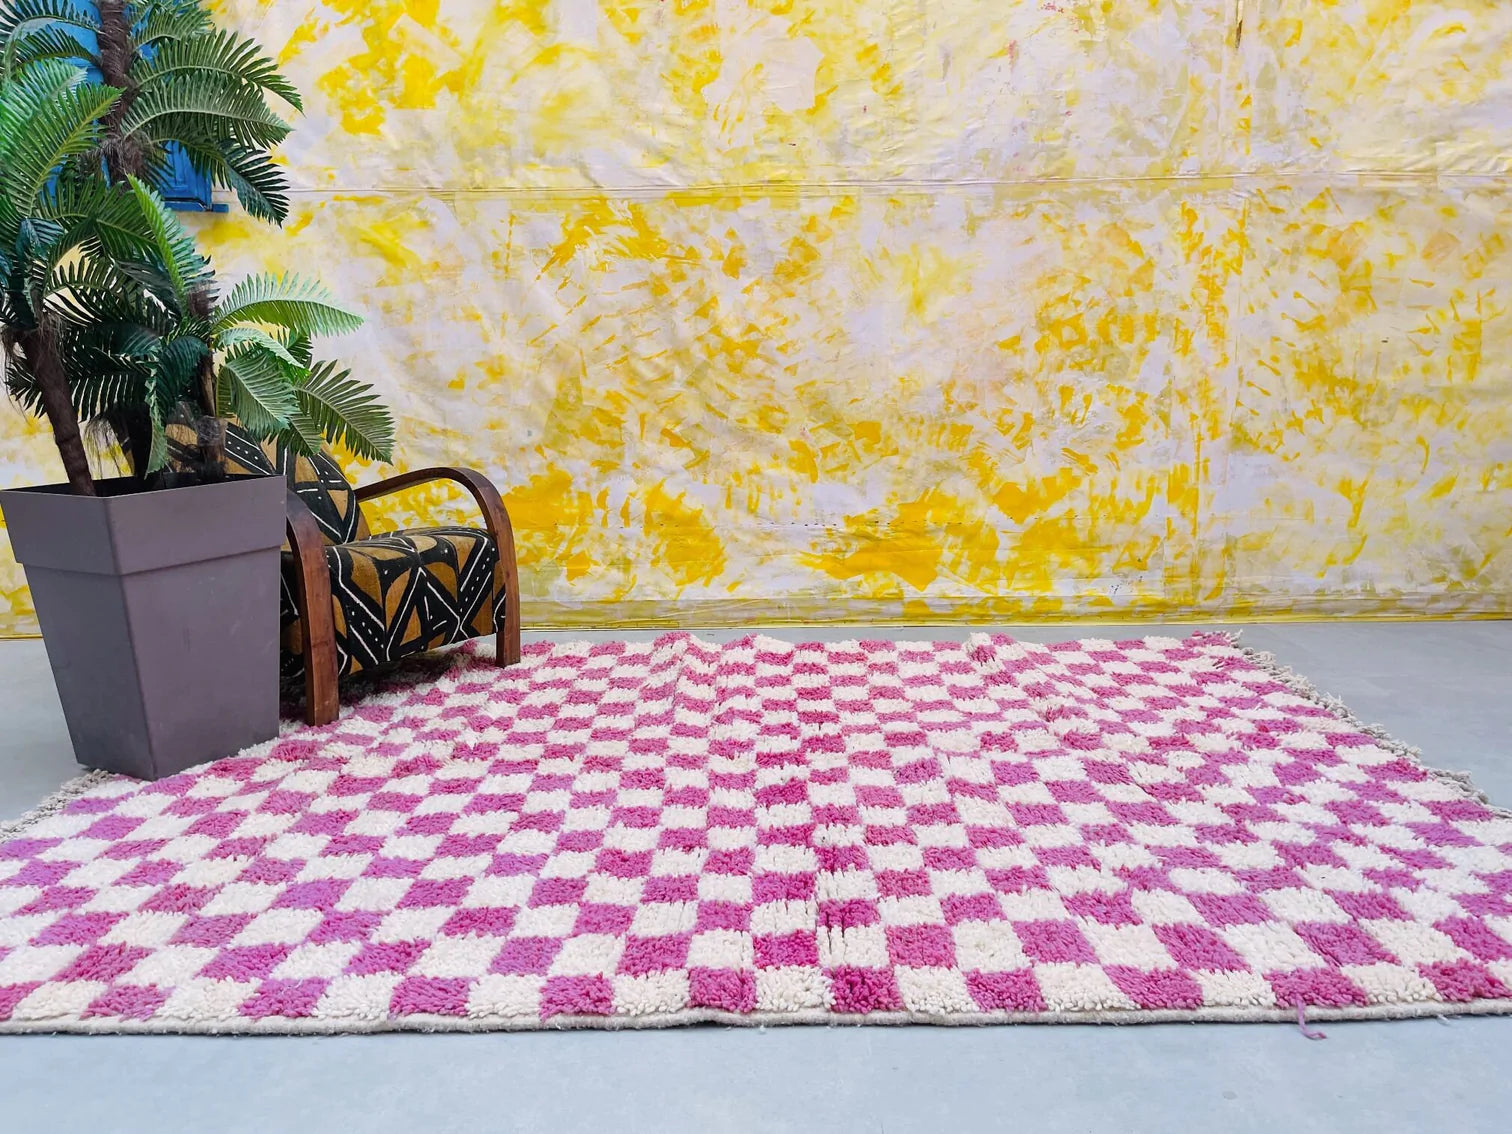 Adding a Unique Touch to Your Home: The Beauty and Versatility of Checkered Moroccan Rugs